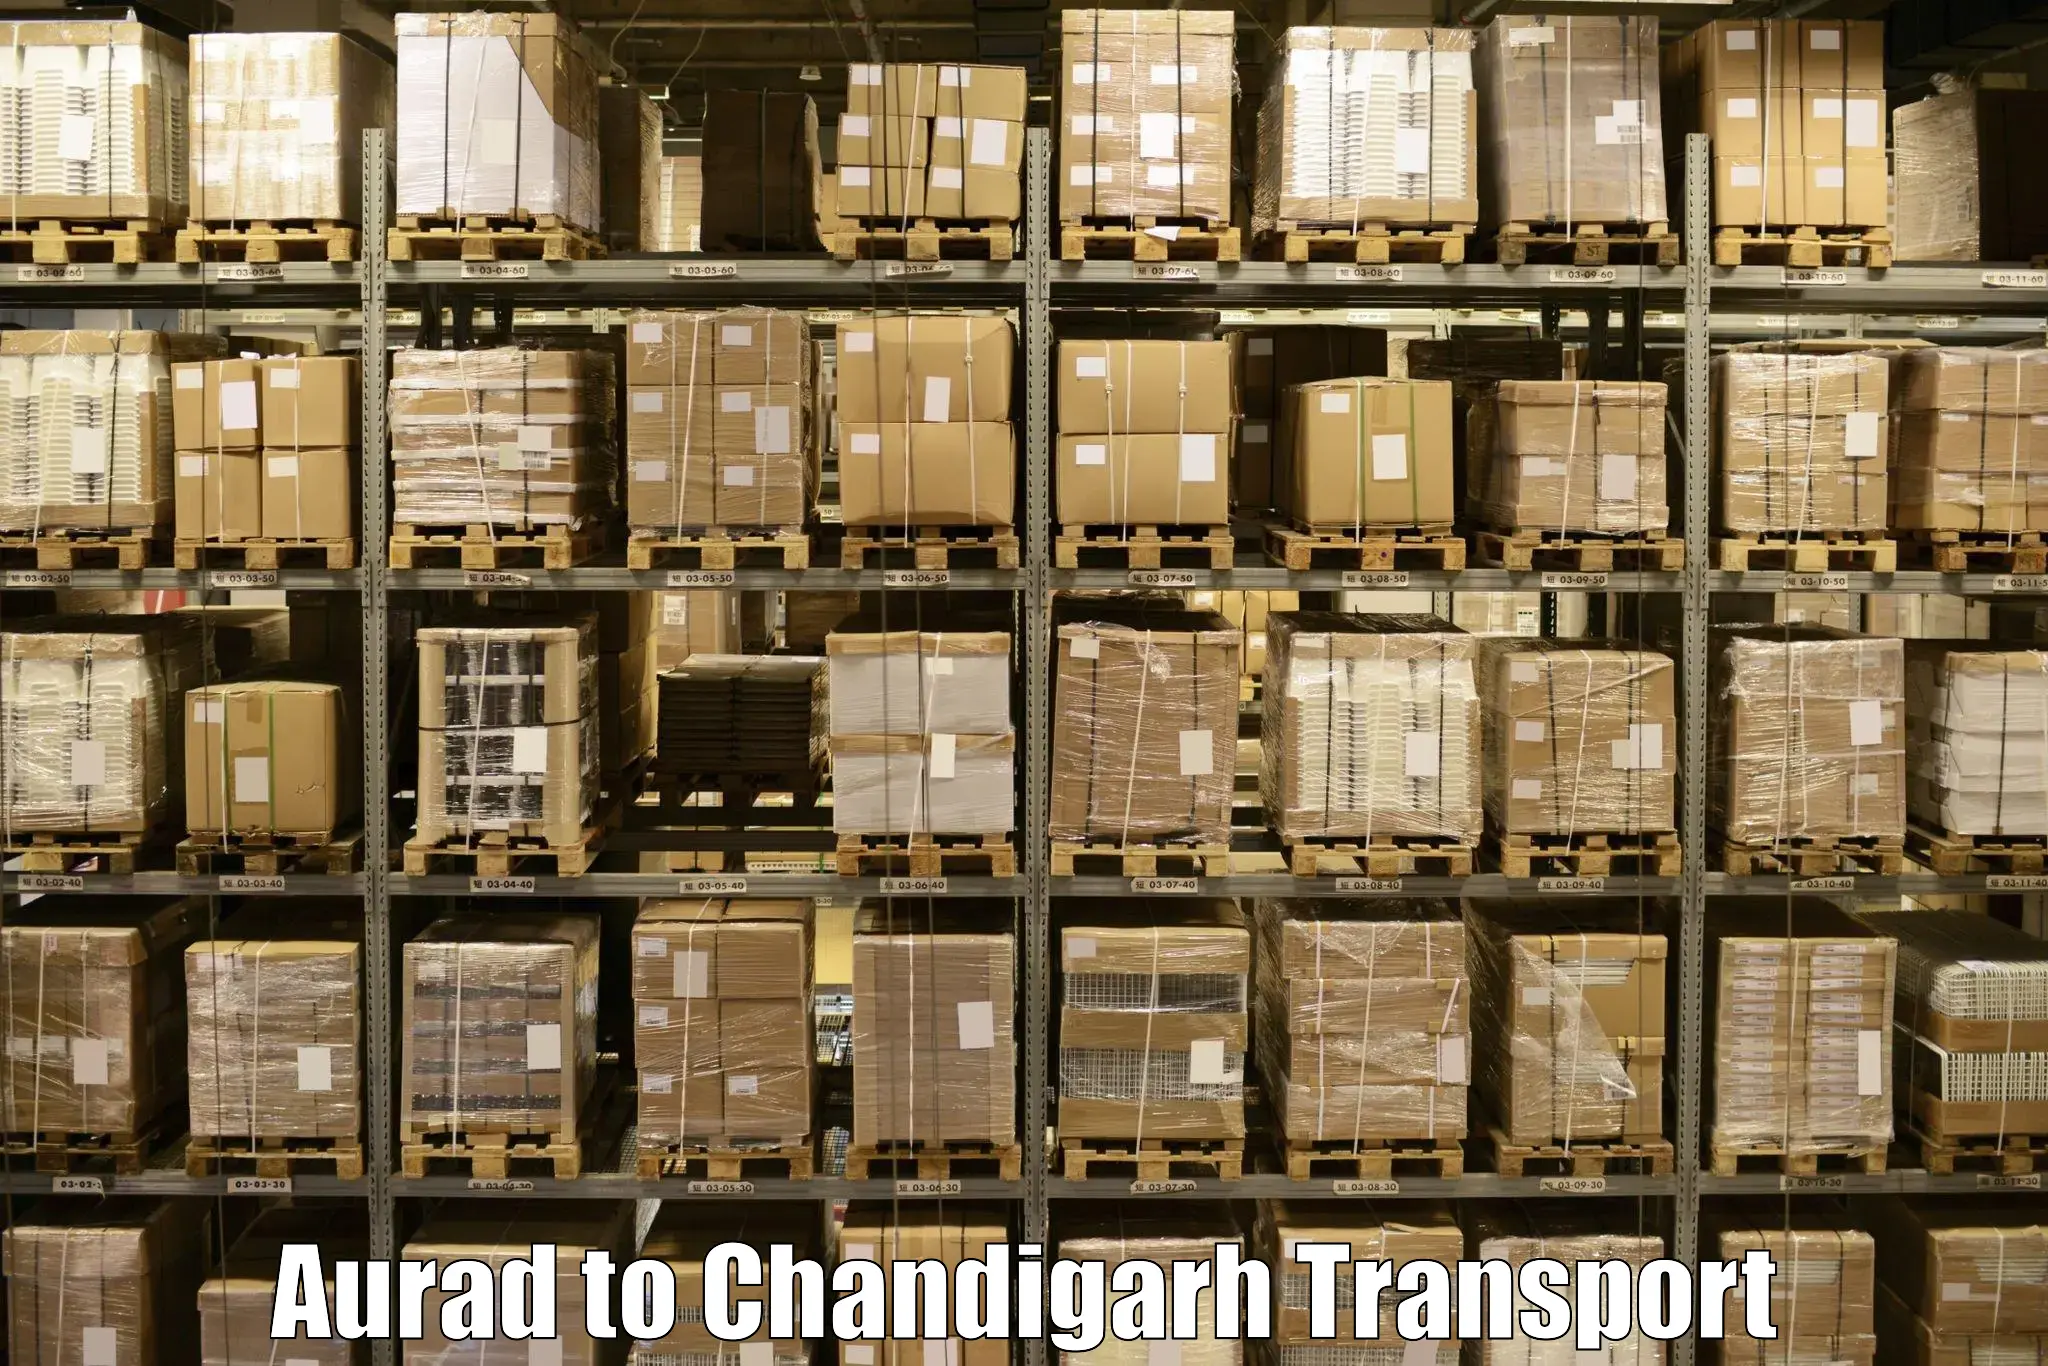 Transport bike from one state to another Aurad to Chandigarh